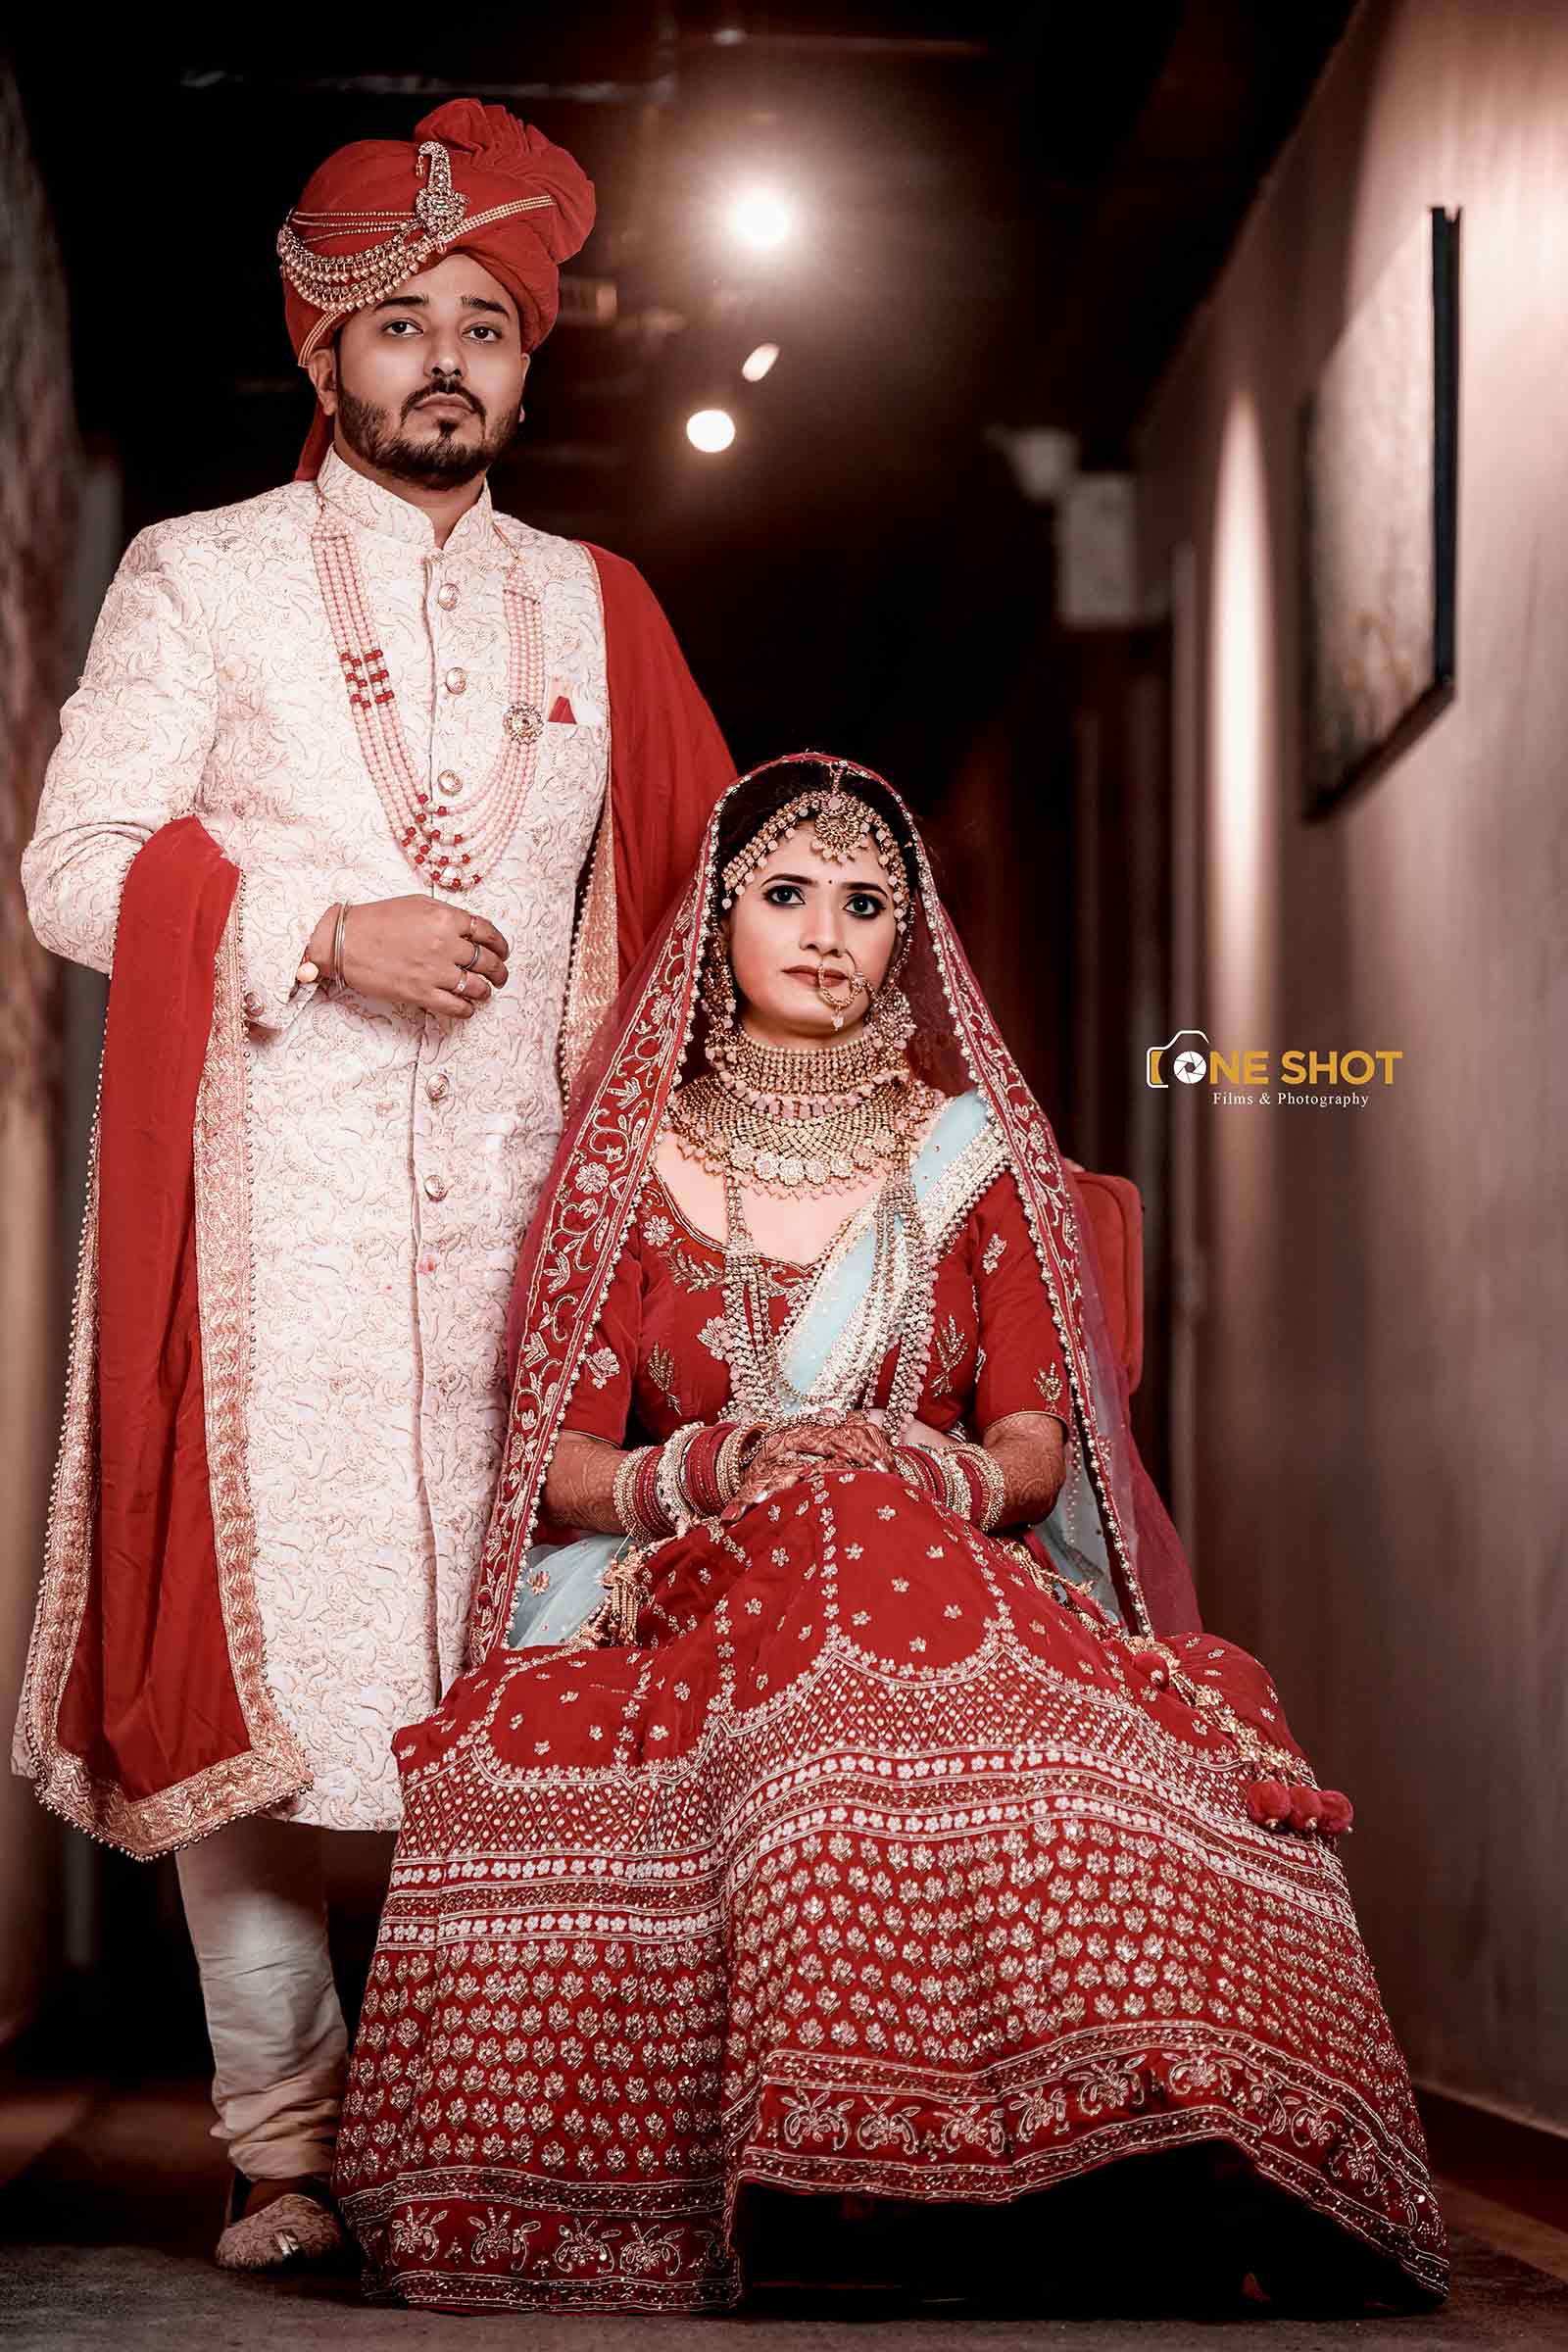 Pin by Sumit Biswas on Sumit | Couple wedding dress indian hindu, Indian  bride photography poses, Indian bridal photos